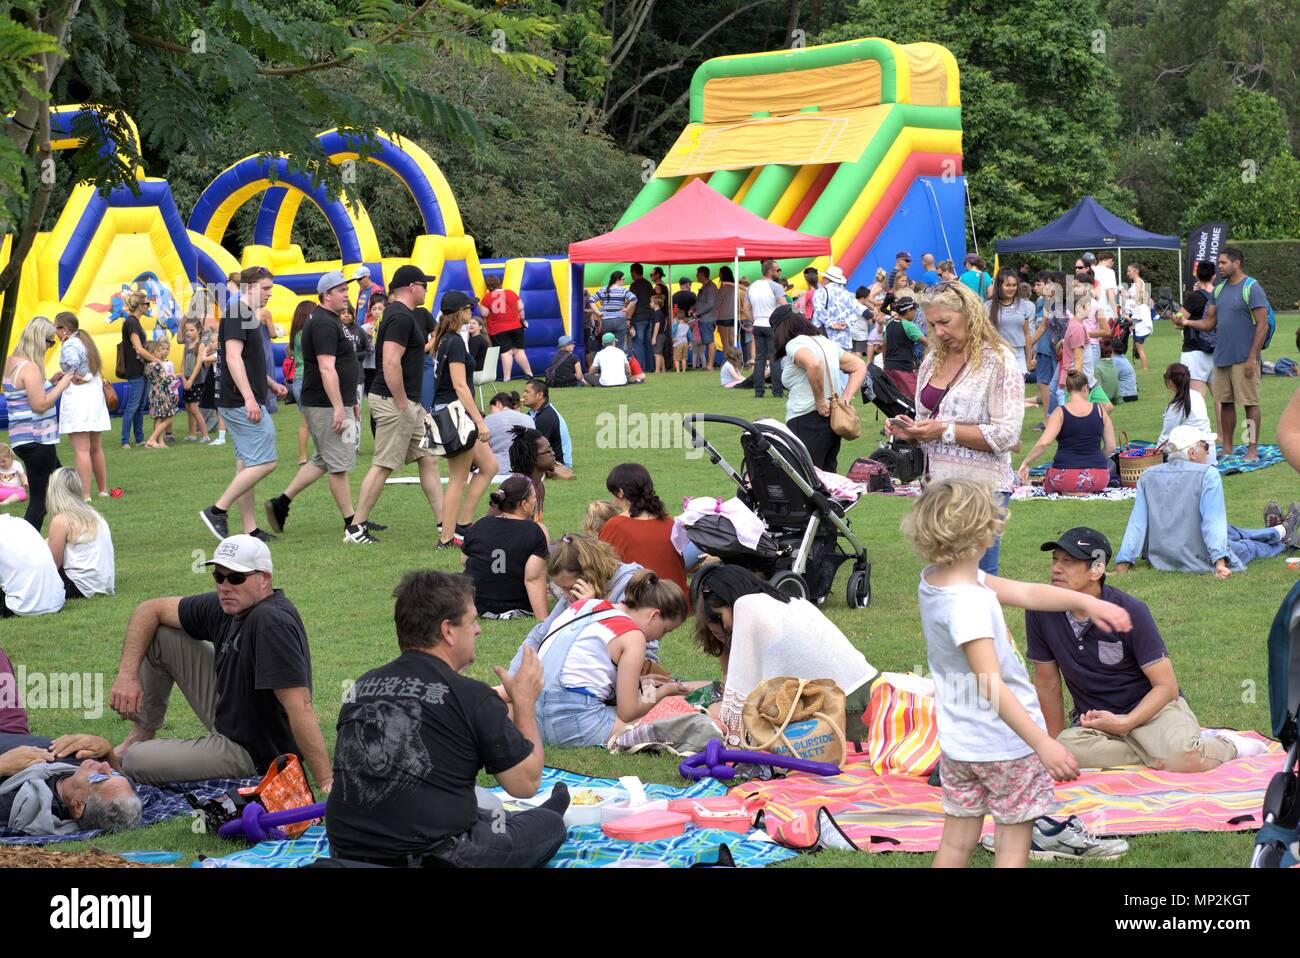 People in park in Australian city of Coffs Harbour's Botanic Garden. People of all ages enjoying day out at Japanese Children's Day Festival. Children Stock Photo